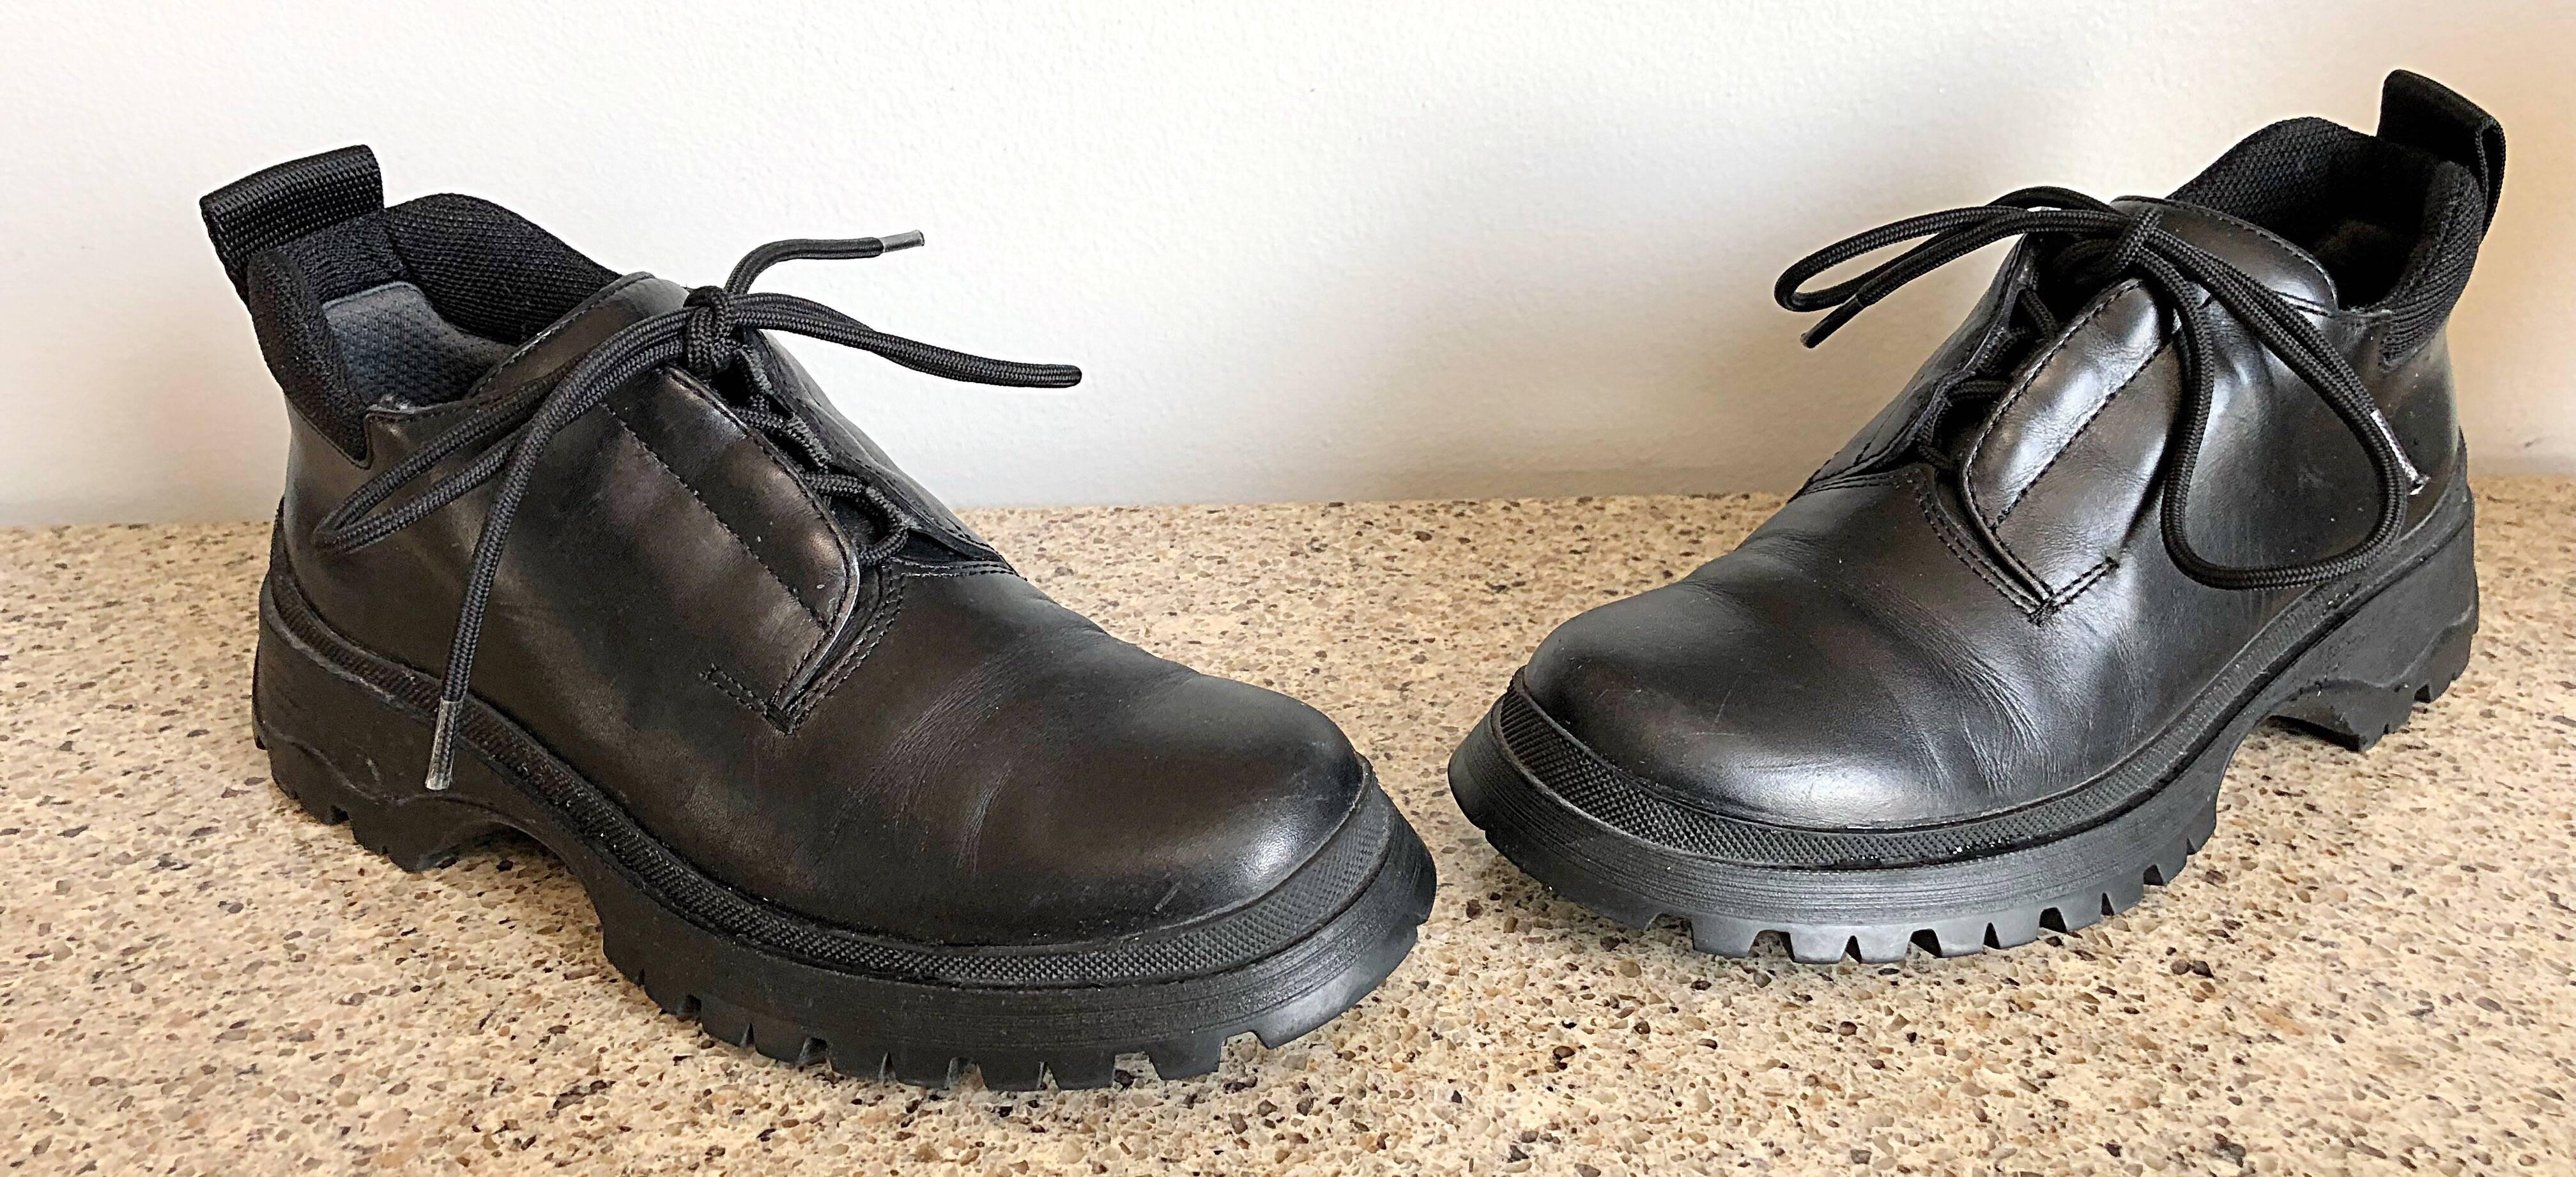 Women's New 1990s Prada Black Leather Size 37.5 / 7.5 Chunky Vintage Flat Ankle Boots For Sale